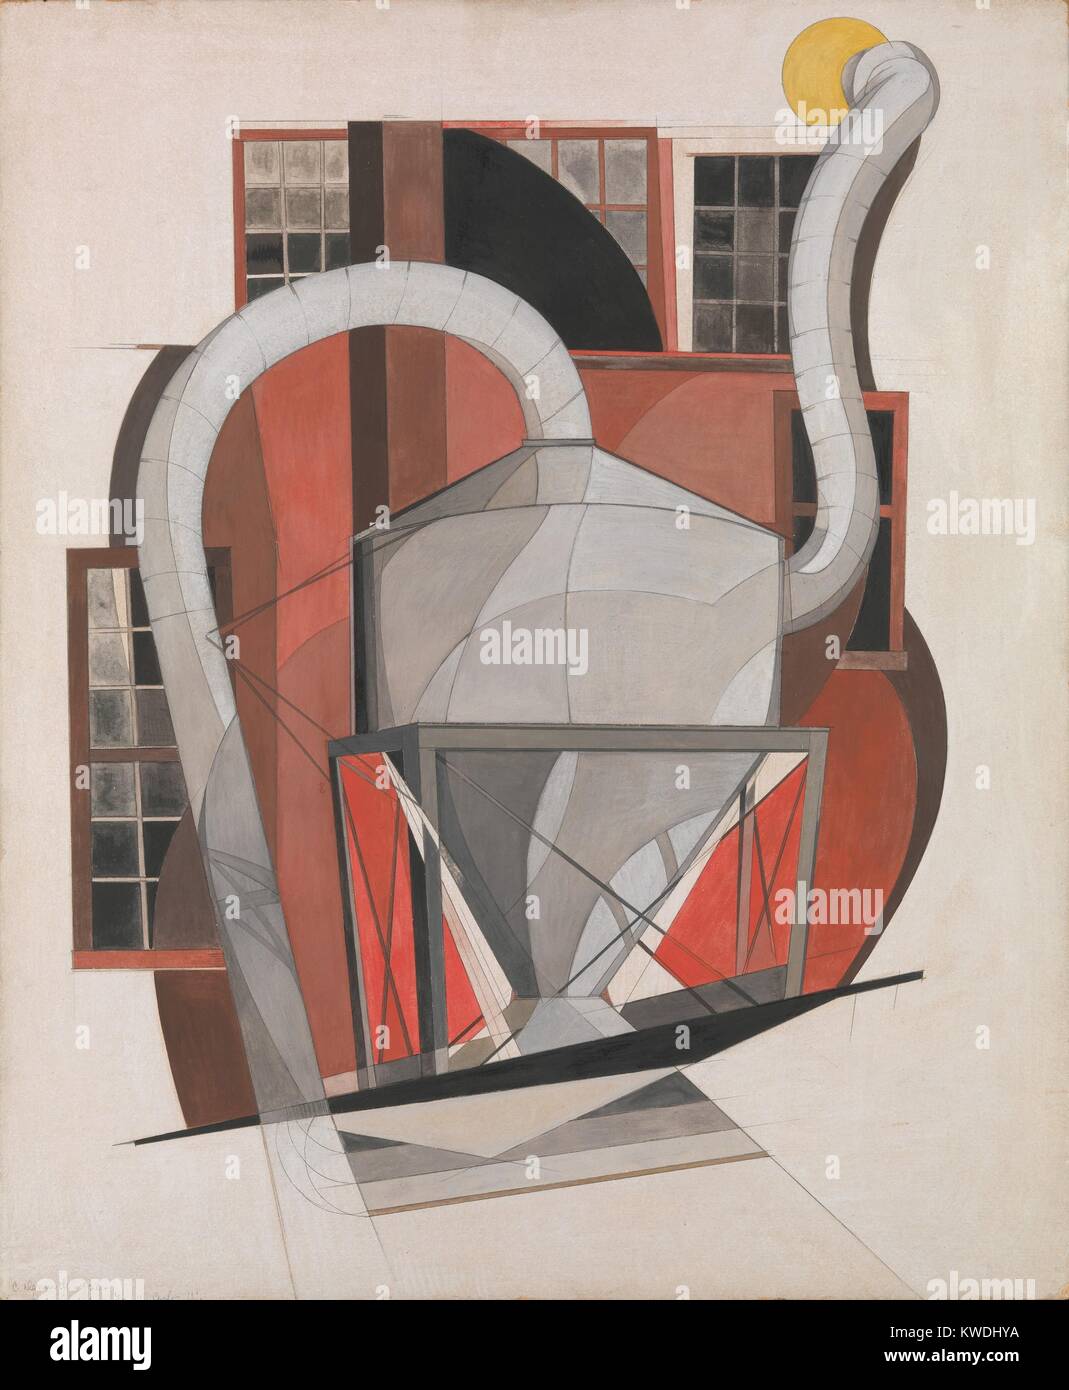 MACHINERY, by Charles Demuth, 1920, American painting, gouache, and graphite on cardboard. This work is based on industrial architecture in Demuths hometown of Lancaster, Pennsylvania. Minimally abstracted with elegant lines and forms, the rooftop machinery with a background of factory is clearly depicted (BSLOC 2017 7 94) Stock Photo